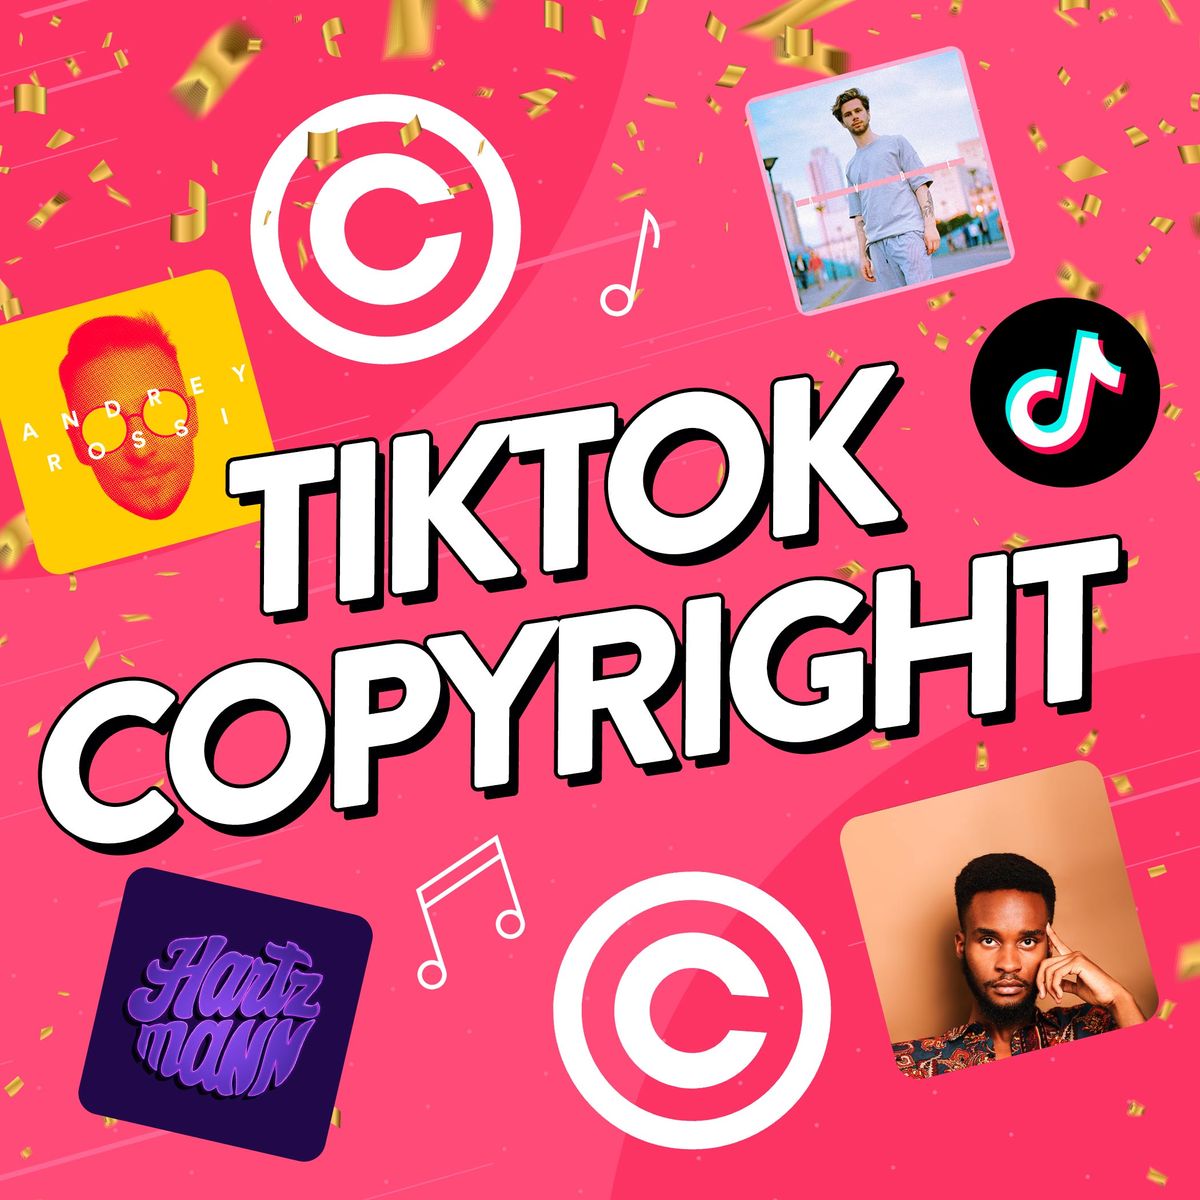 Image that includes different symbols relating to TikTok copyright.